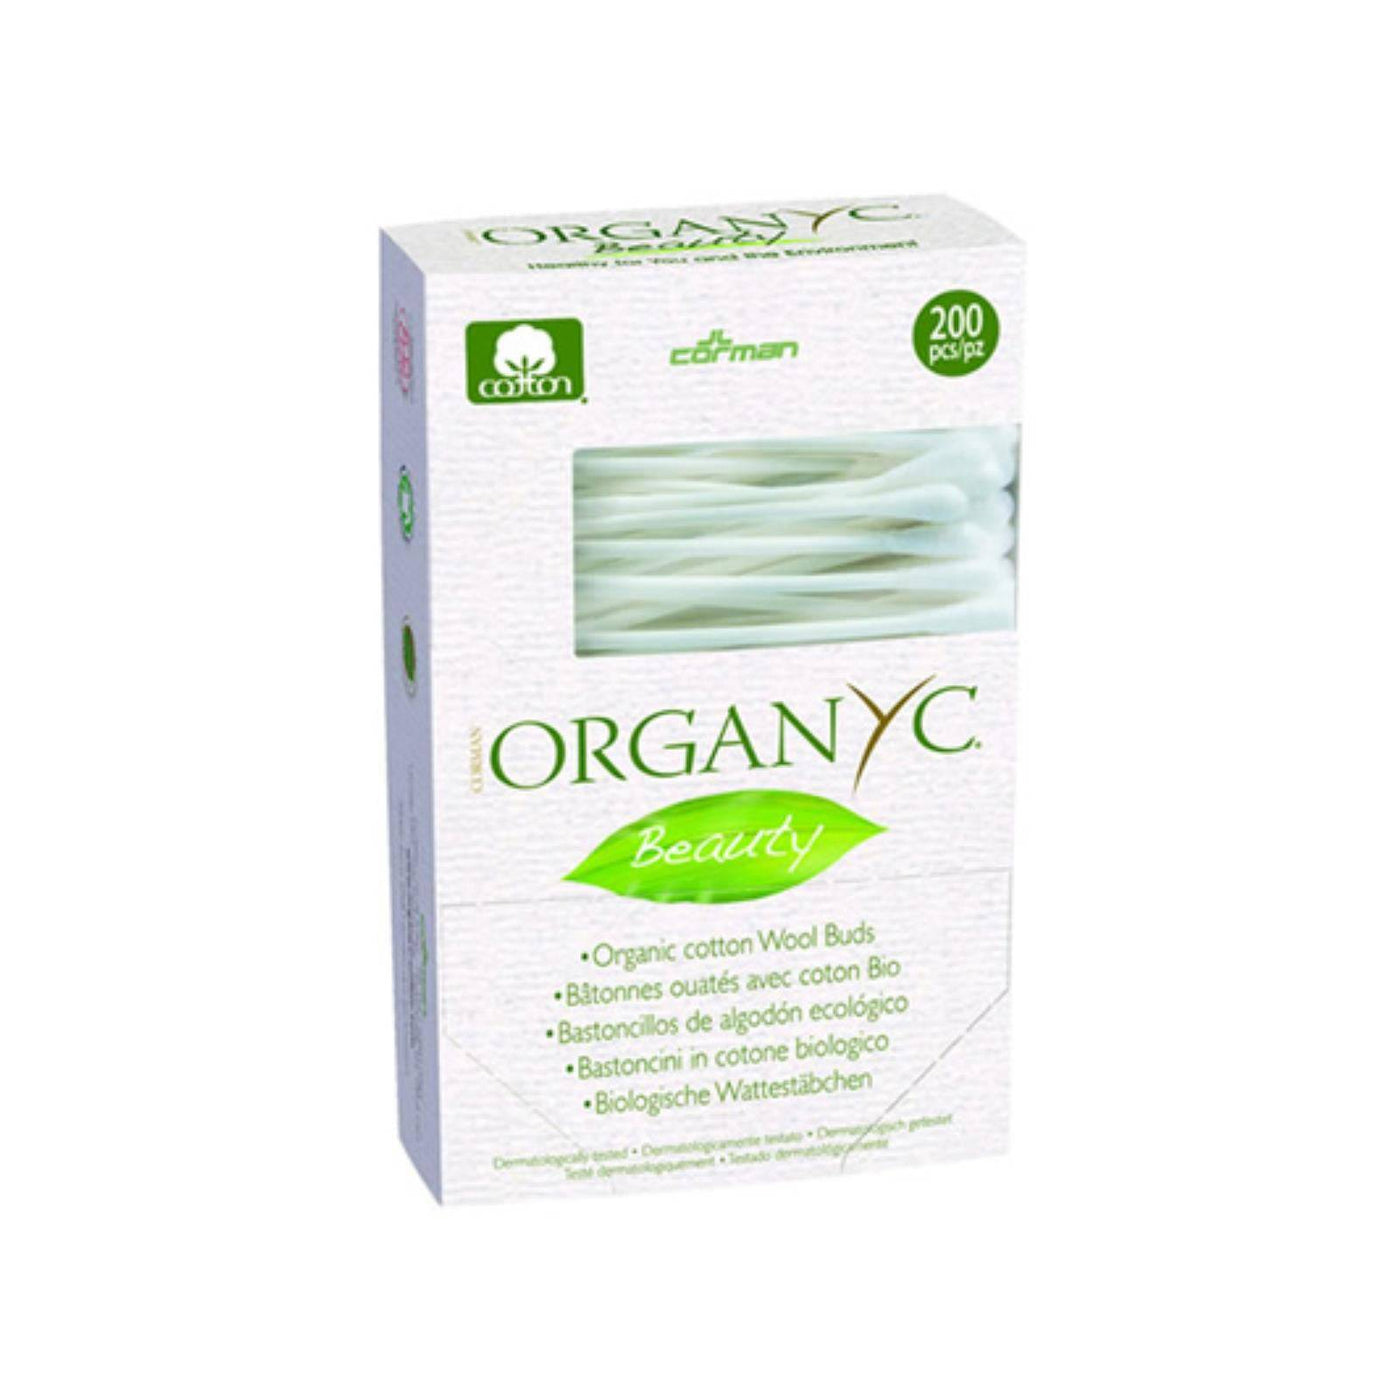 Organyc Beauty Cotton Swabs - 200 Pack | OnlyNaturals.us